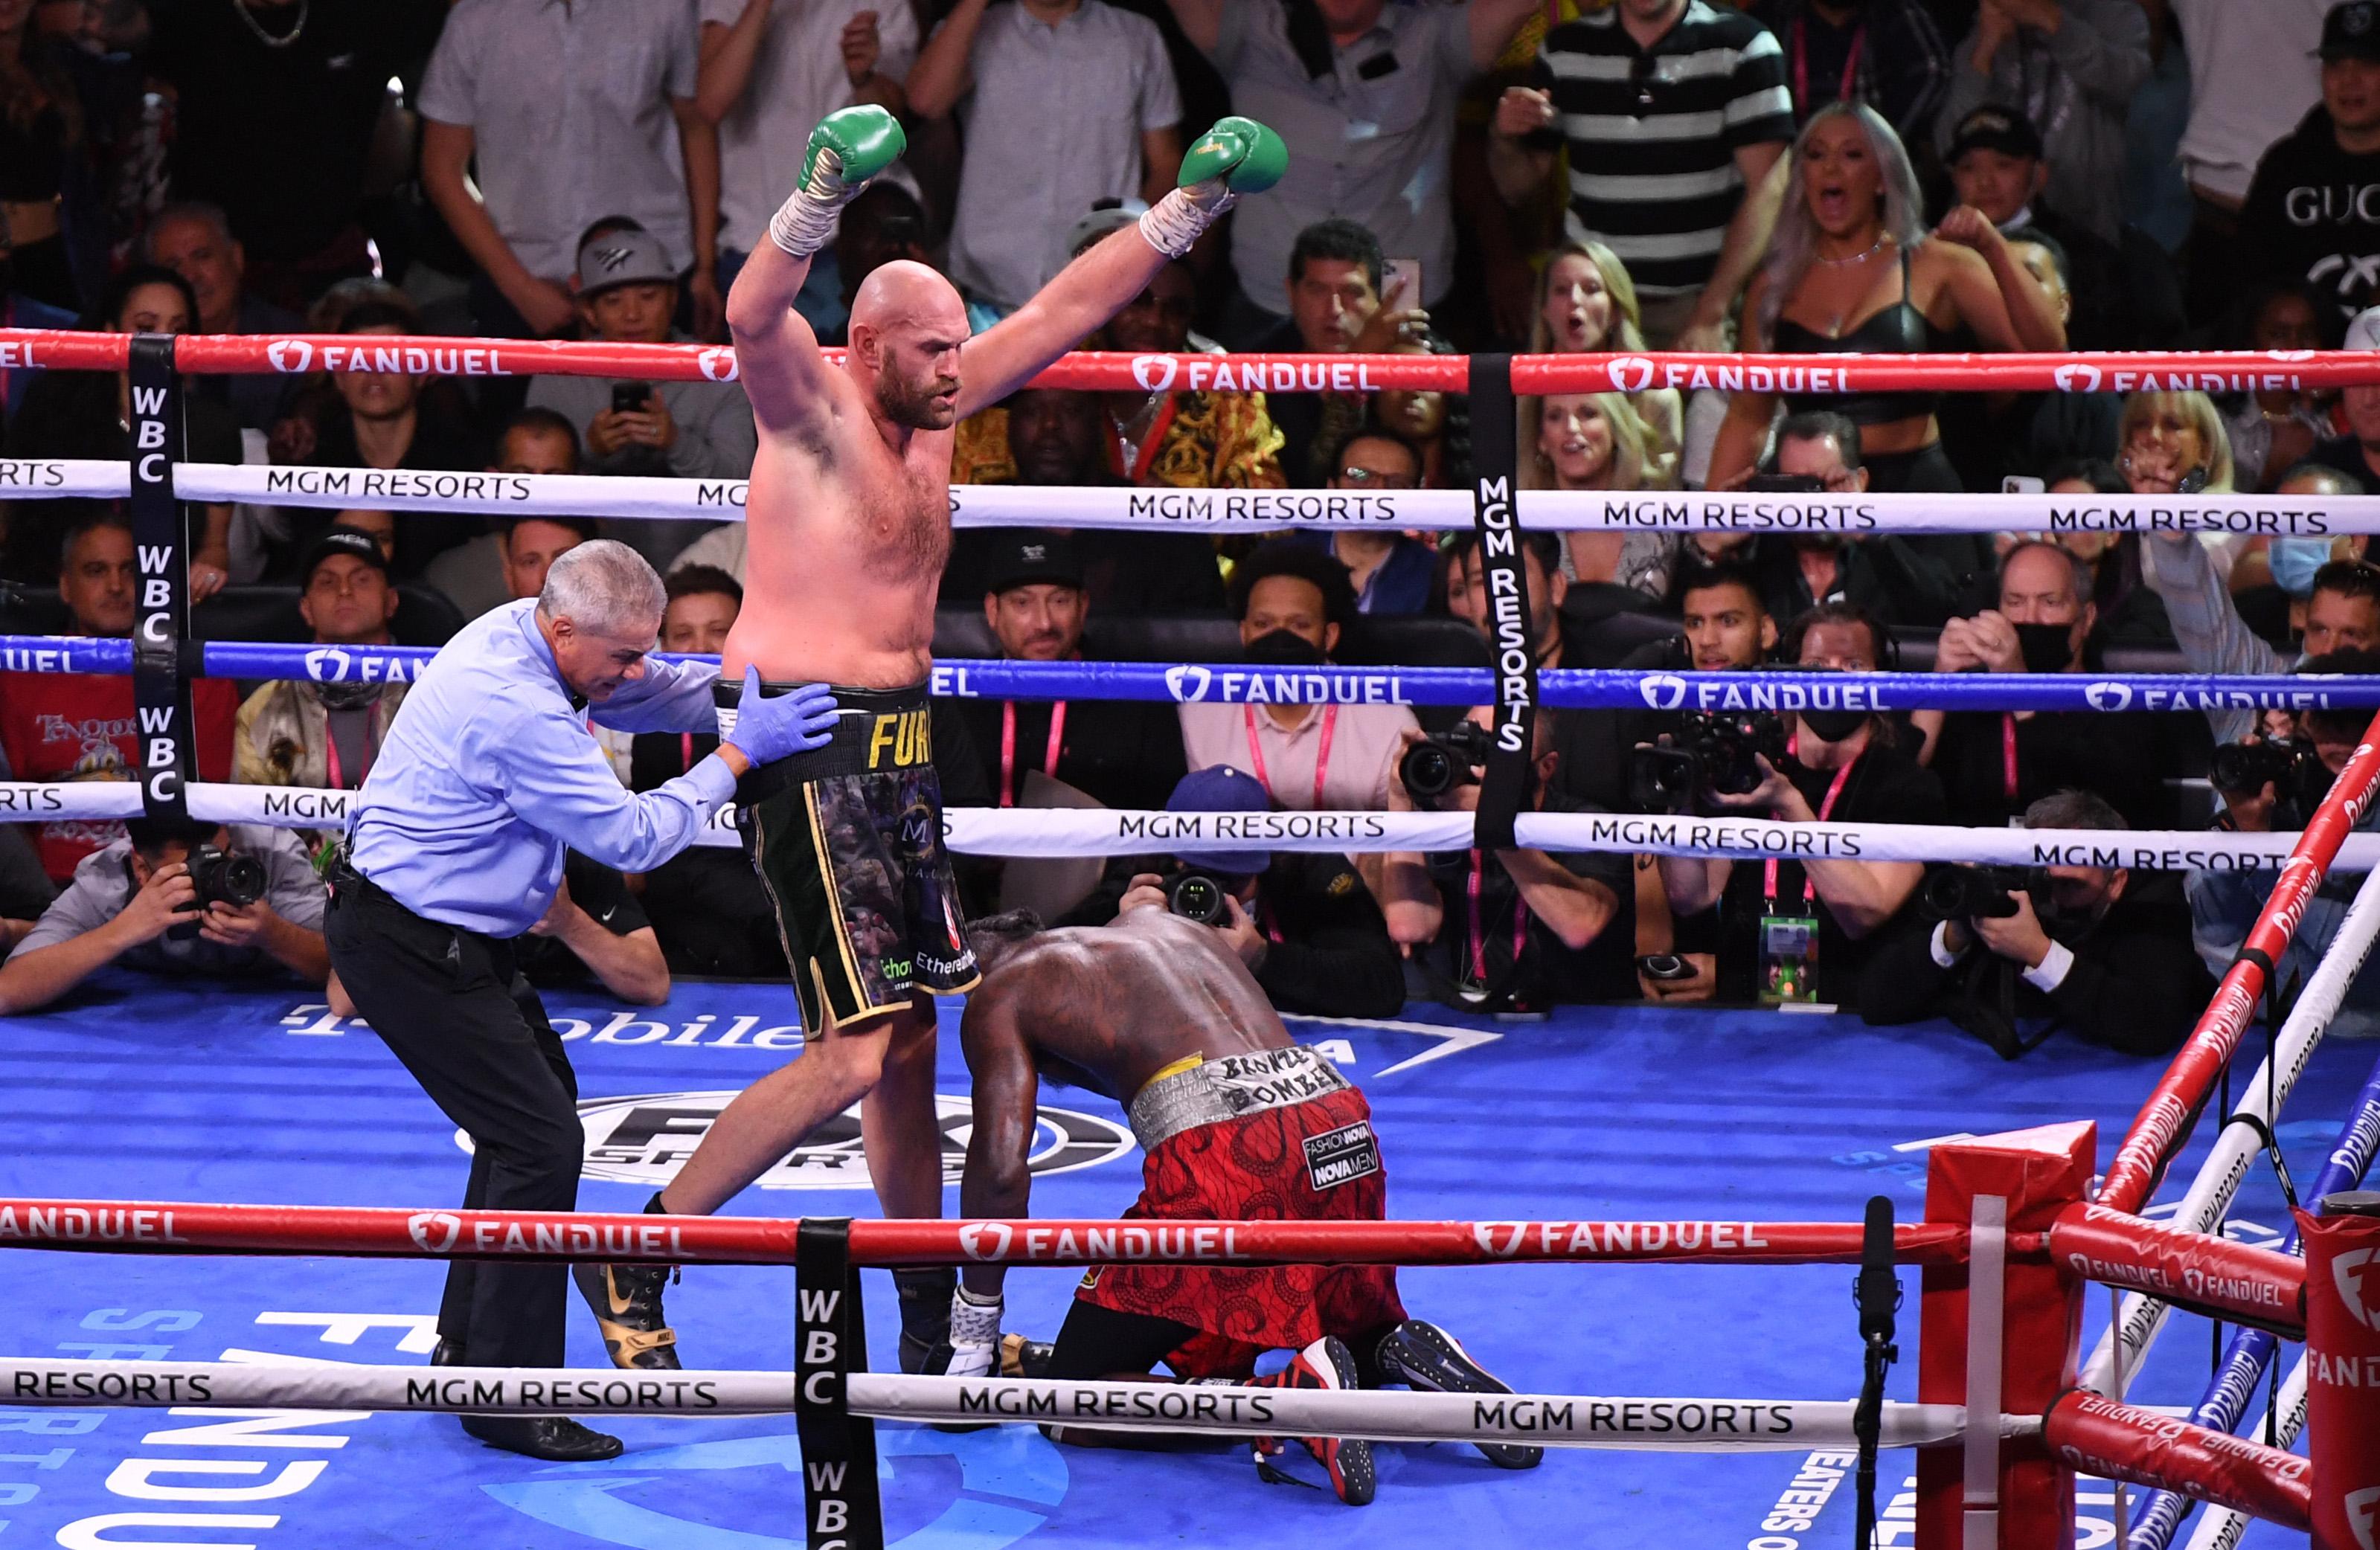 Tyson Fury gets up from two knockdowns, batters Deontay Wilder to win by KO GMA News Online